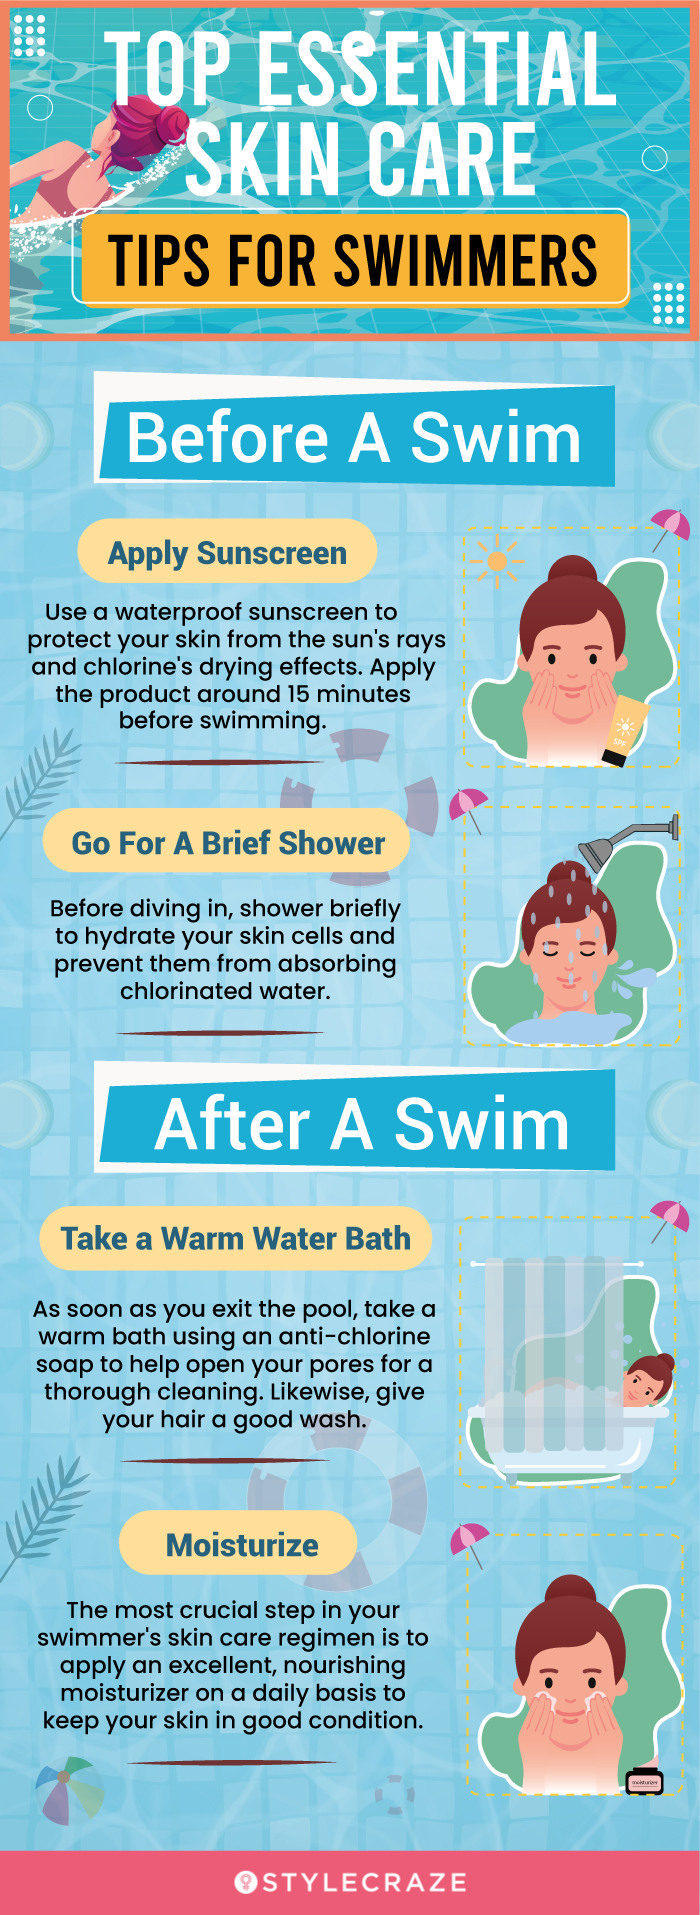 top essential skin care tips for swimmers (infographic)